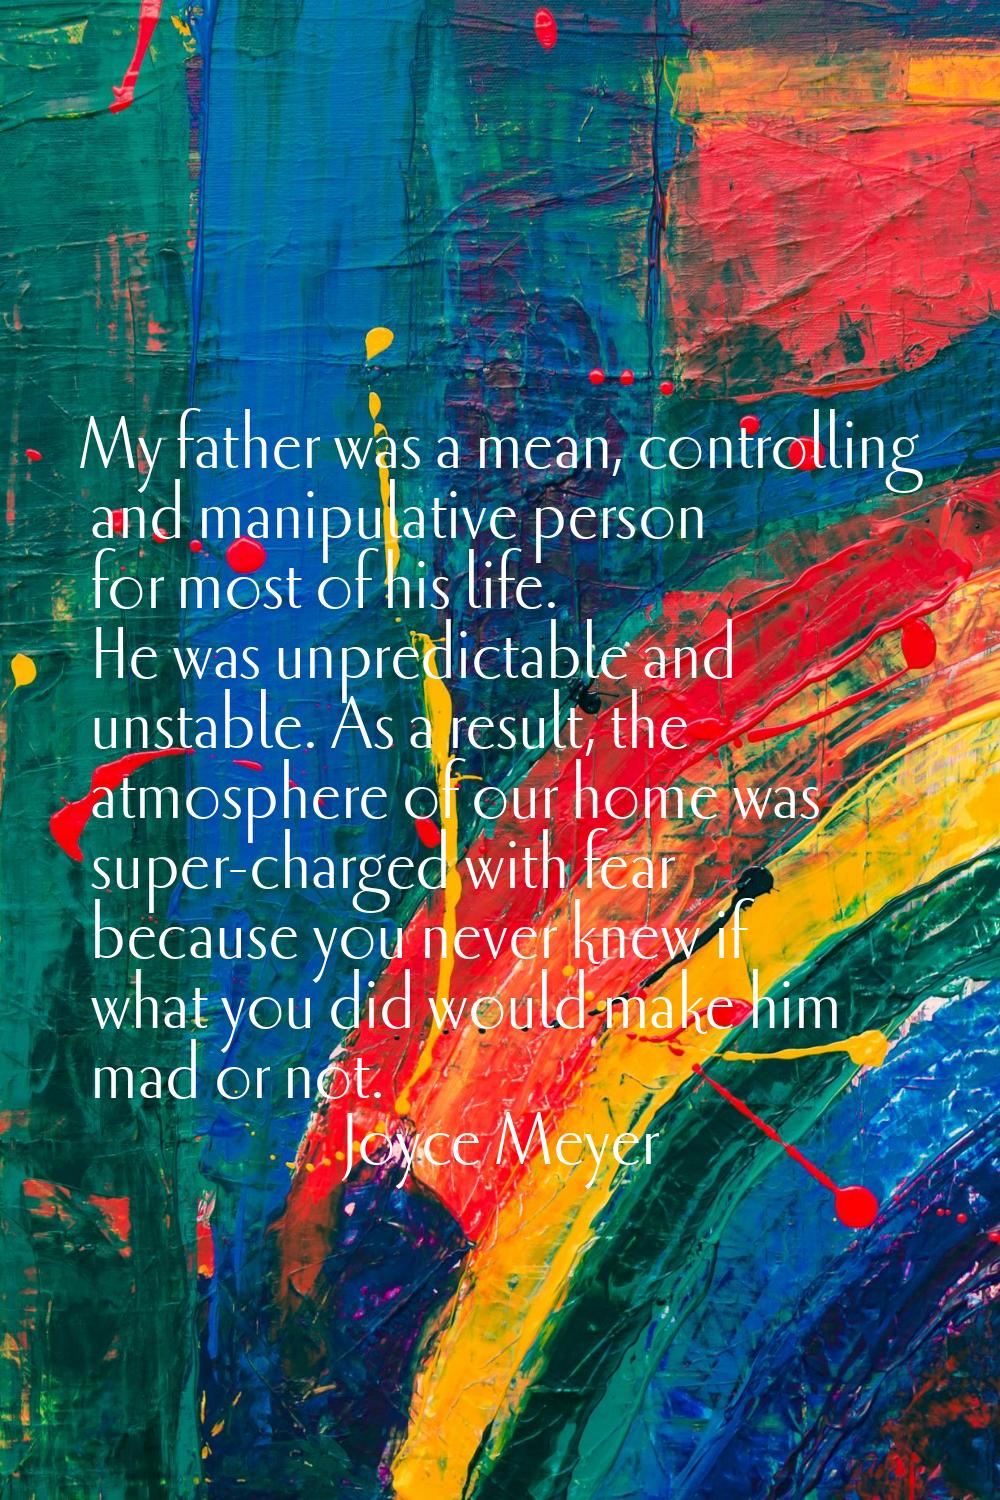 My father was a mean, controlling and manipulative person for most of his life. He was unpredictabl